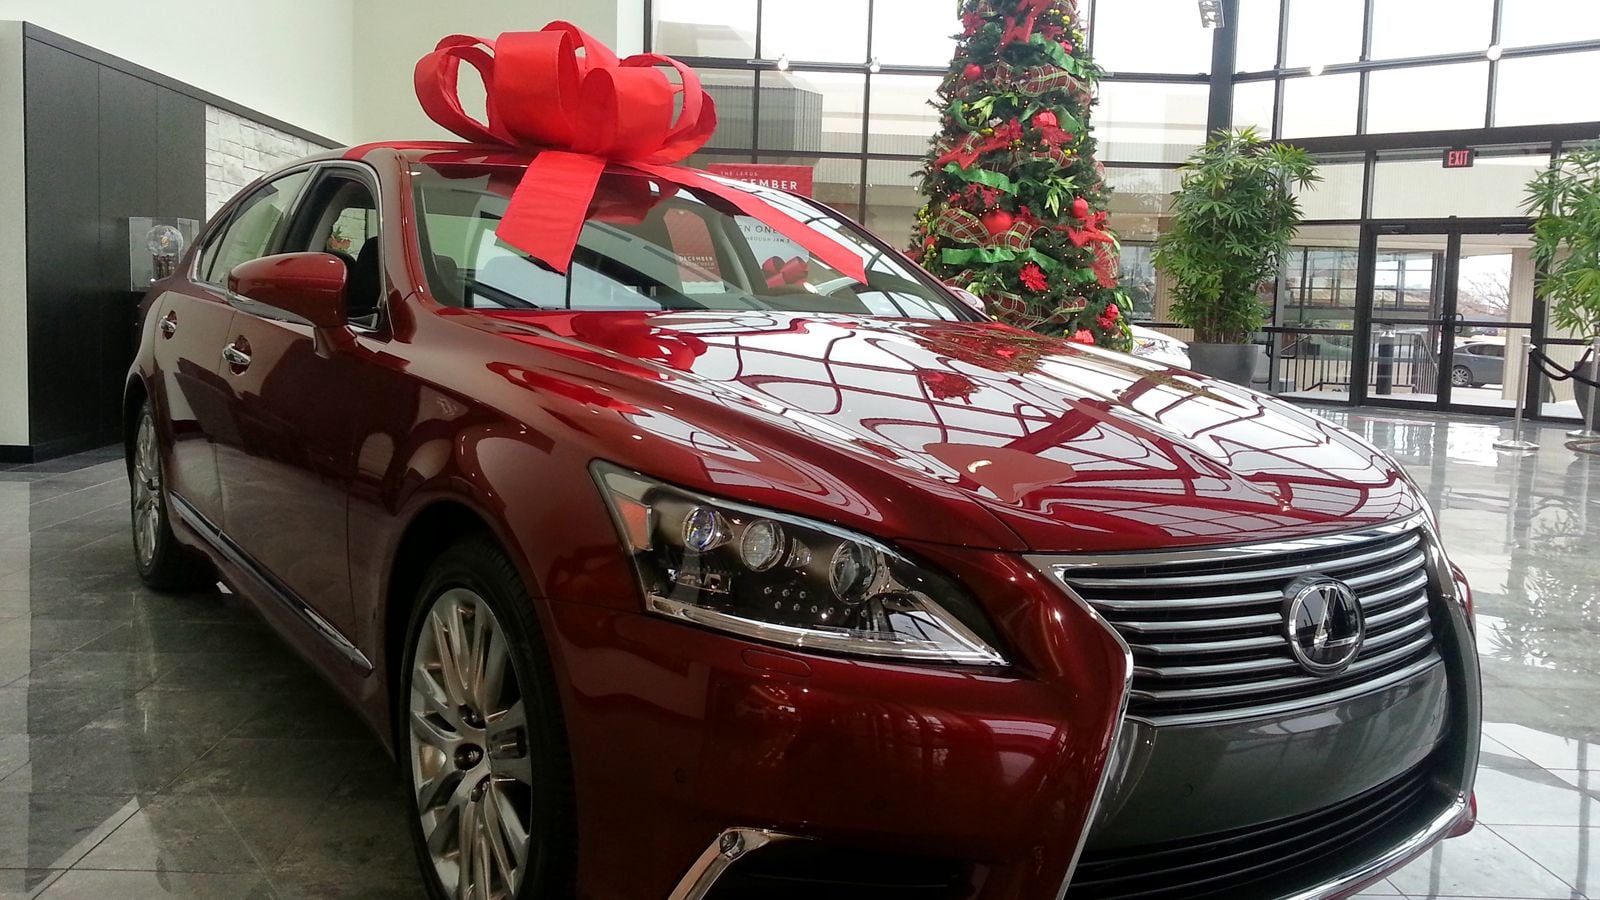 6 Lexus Images That Yell Happy Holidays! Clublexus